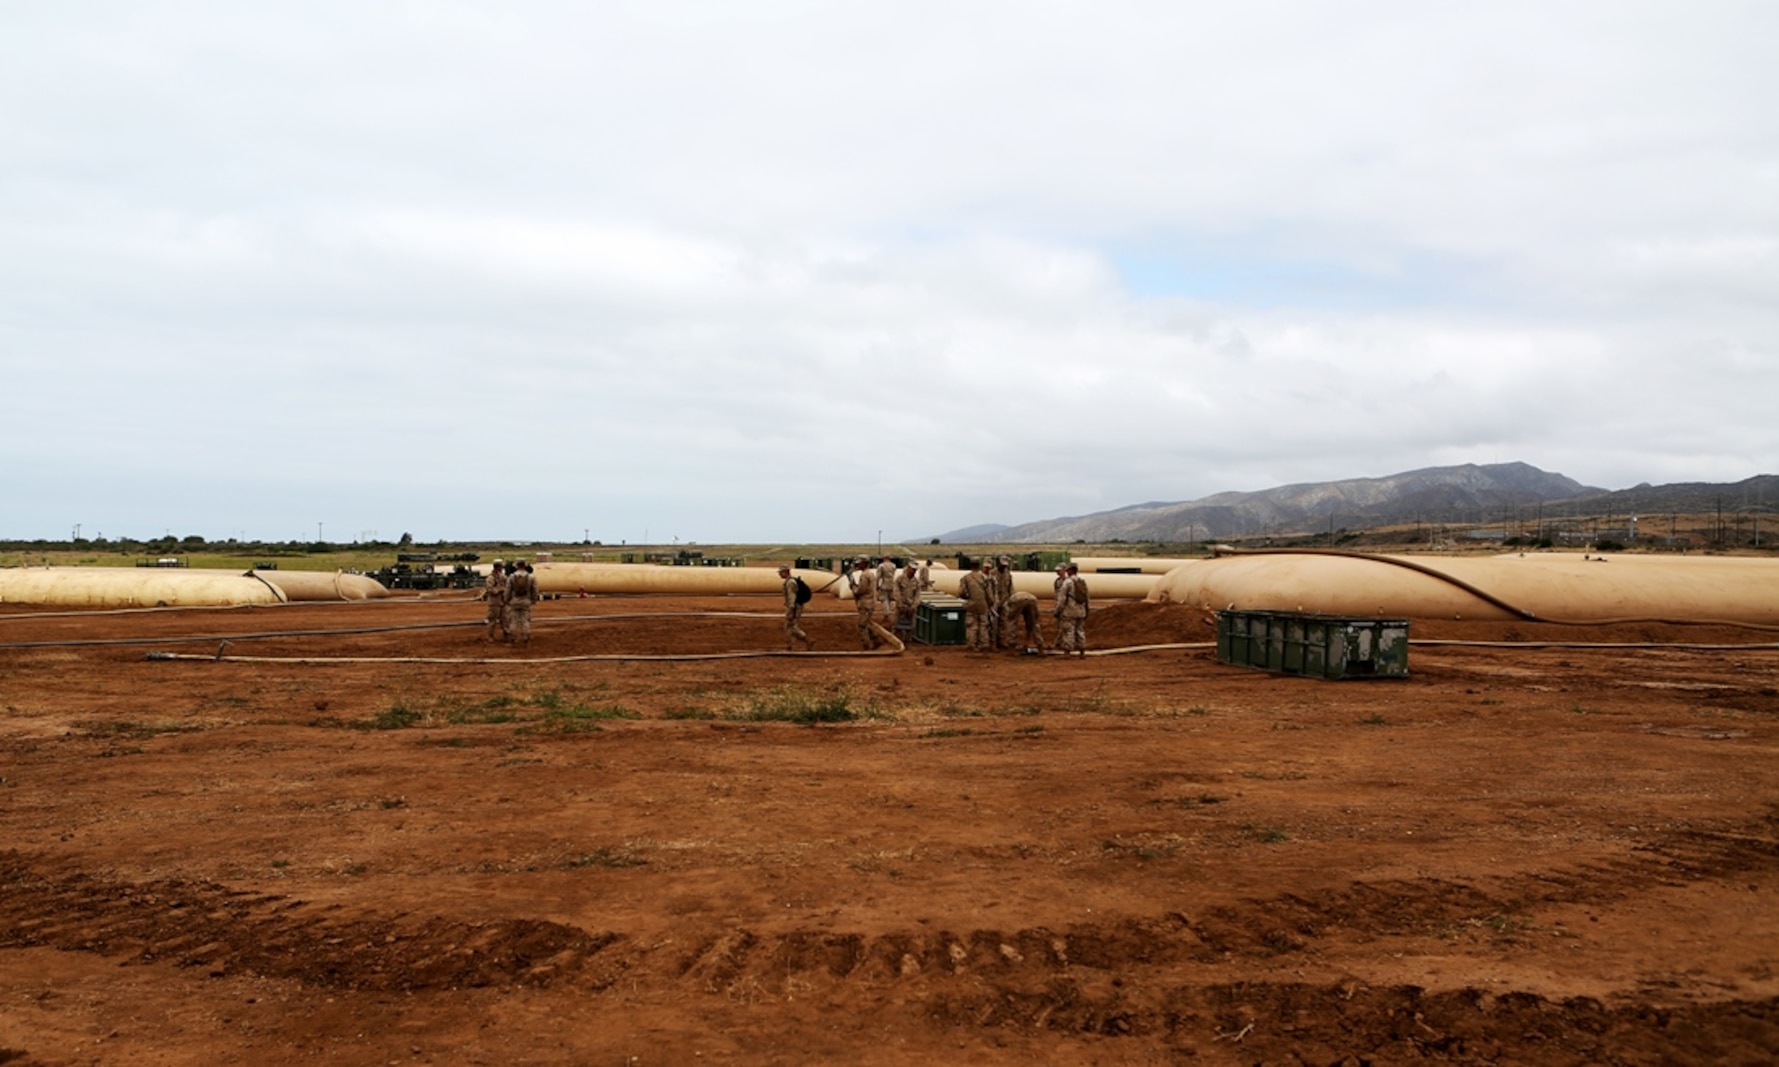 Bulk fuel and water purification Marines from 6th Engineer Support Battalion, 4th Marine Logistics Group, maintain nearly a million gallons of purified water during an annual training exercise aboard Camp Pendleton, Calif., June 13, 2016 to increase readiness and fulfill their yearly requirements as a reserve unit. 7th ESB, 1st Marine Logistics Group, supported their reserve counterparts with the gear necessary to pump water nearly 3 miles from the ocean at Red Beach to a training area where they practiced setting up and maintaining massive stores of water. (U.S. Marine Corps photo by Sgt. Carson Gramley/released)